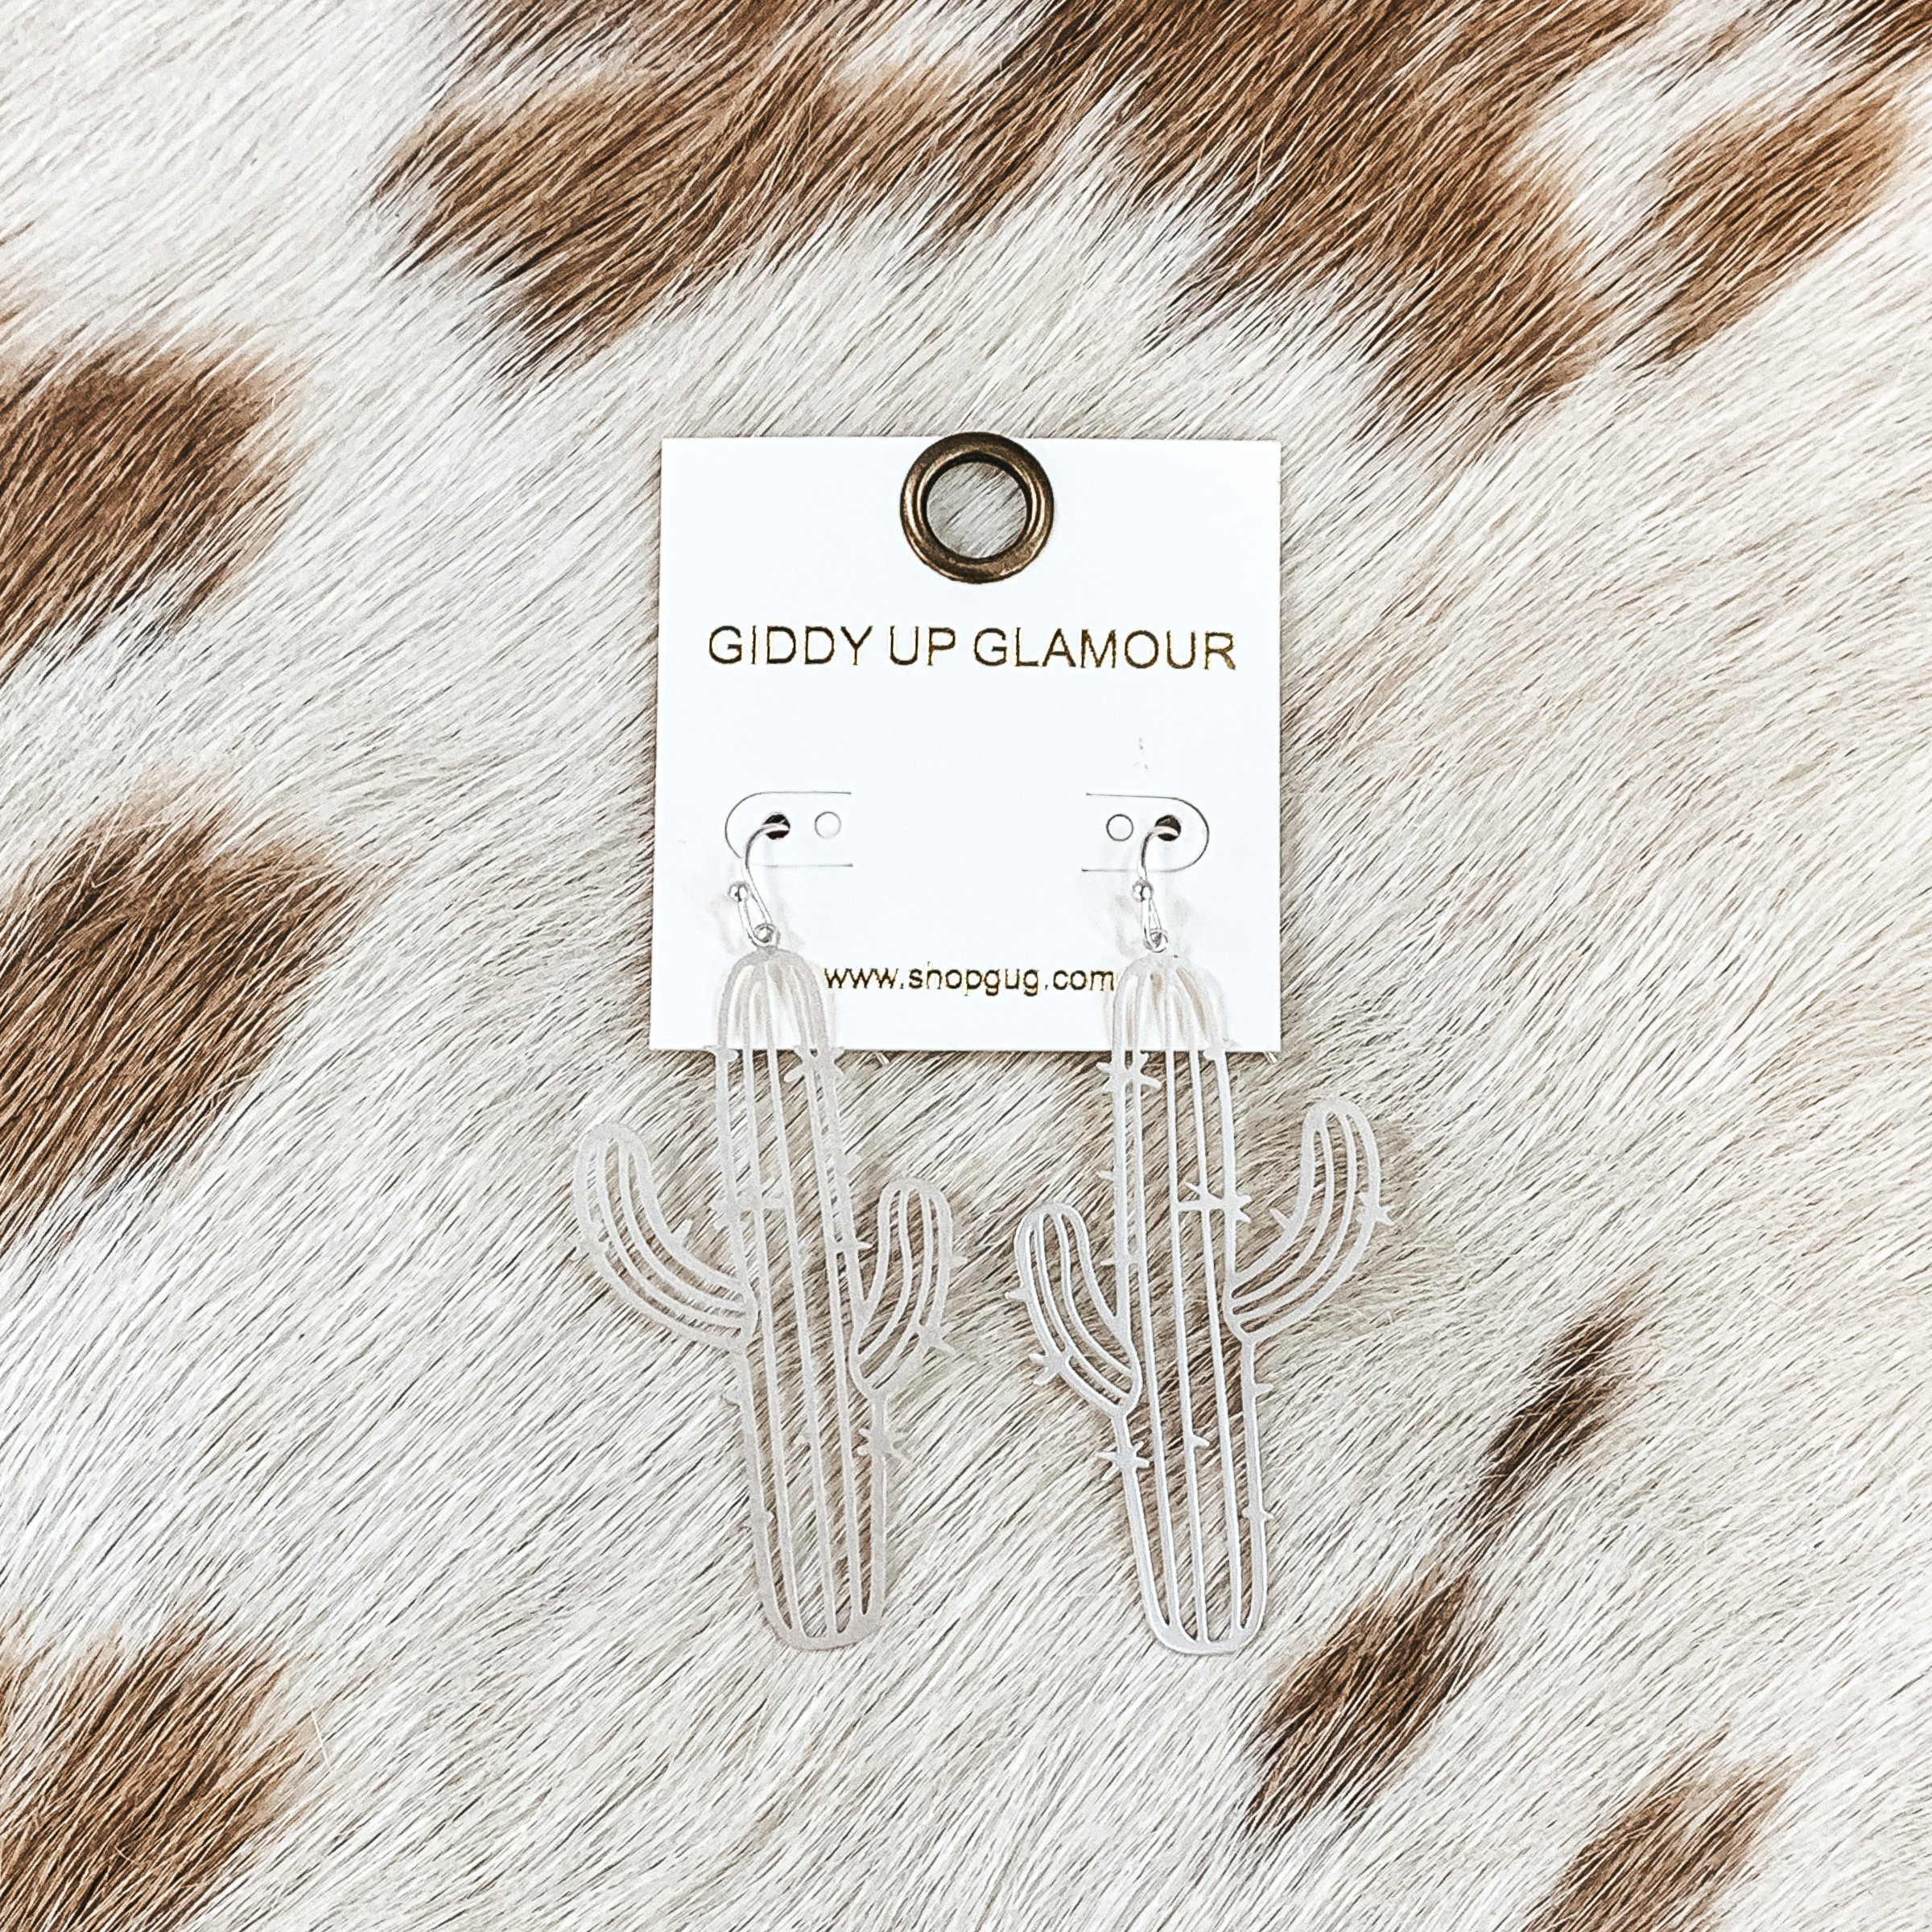 Desert Views Metal Cutout Earrings in Matte Silver - Giddy Up Glamour Boutique